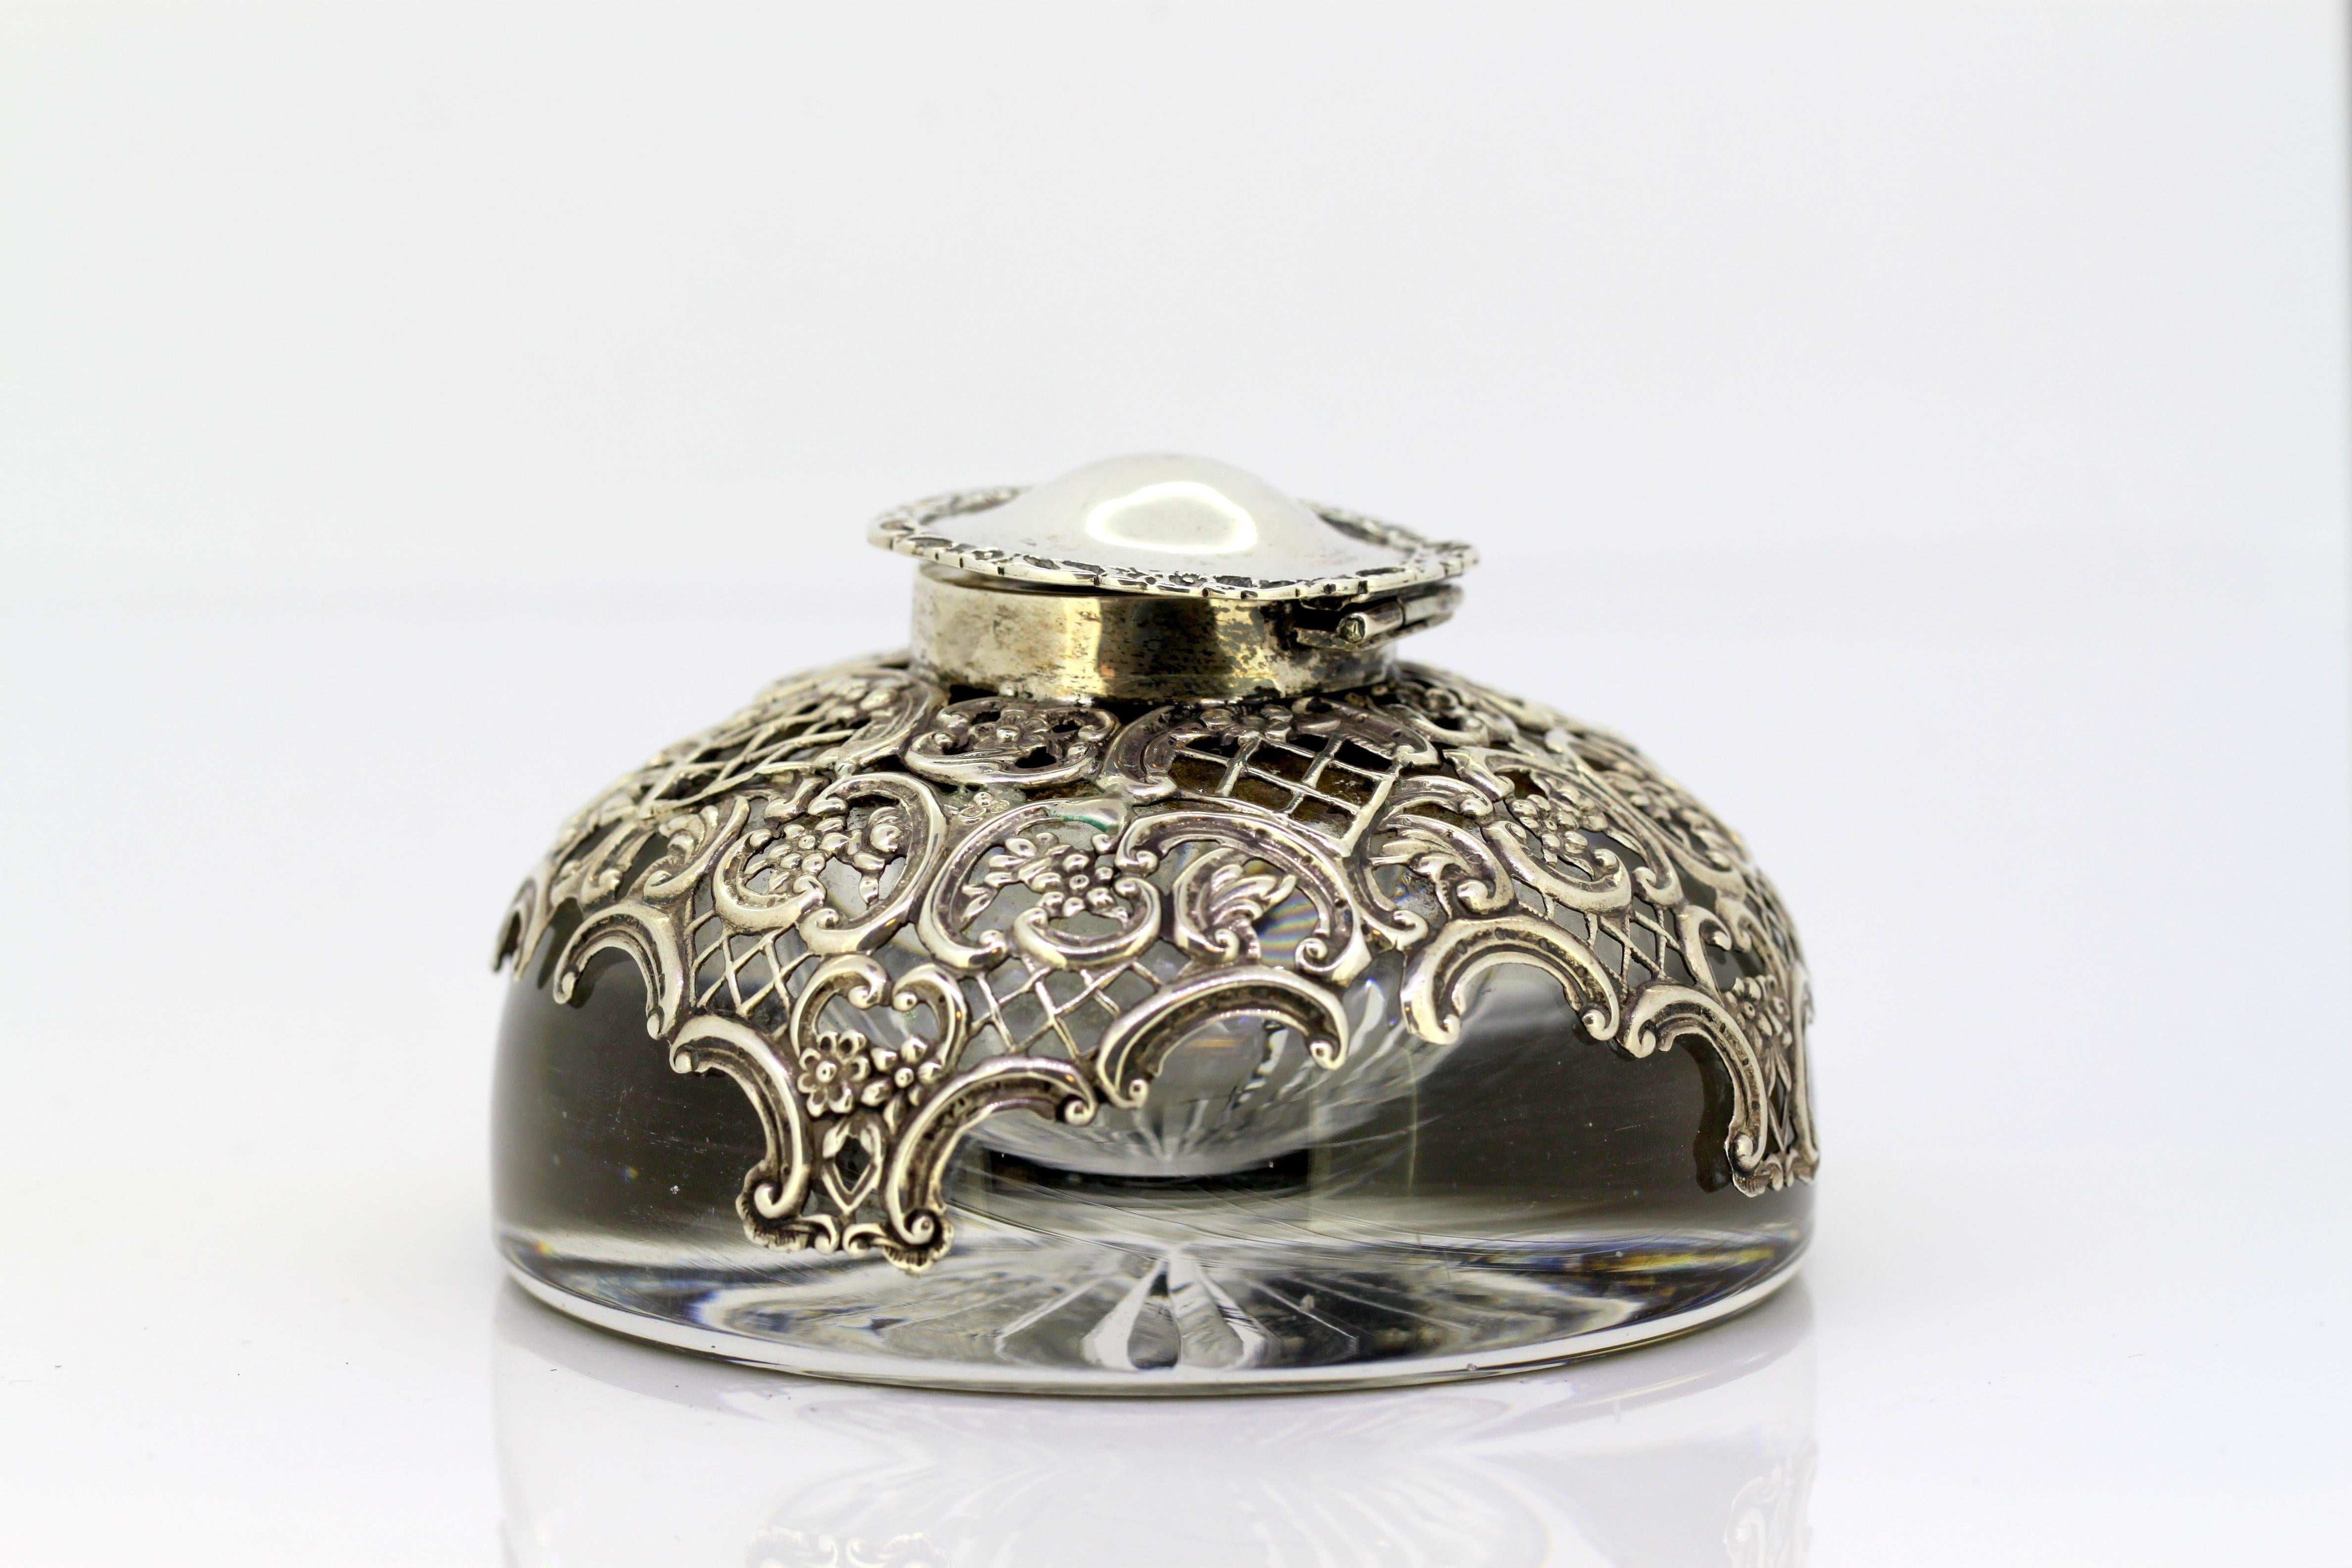 Antique sterling silver and crystal glass ink stand
Maker: William Comyns & Sons
Made in London 1904
Fully hallmarked.

Dimensions: 
Diameter x height: 11.5 x 7 cm
Weight: 1202 grams.

Condition: Item has some surface wear from general